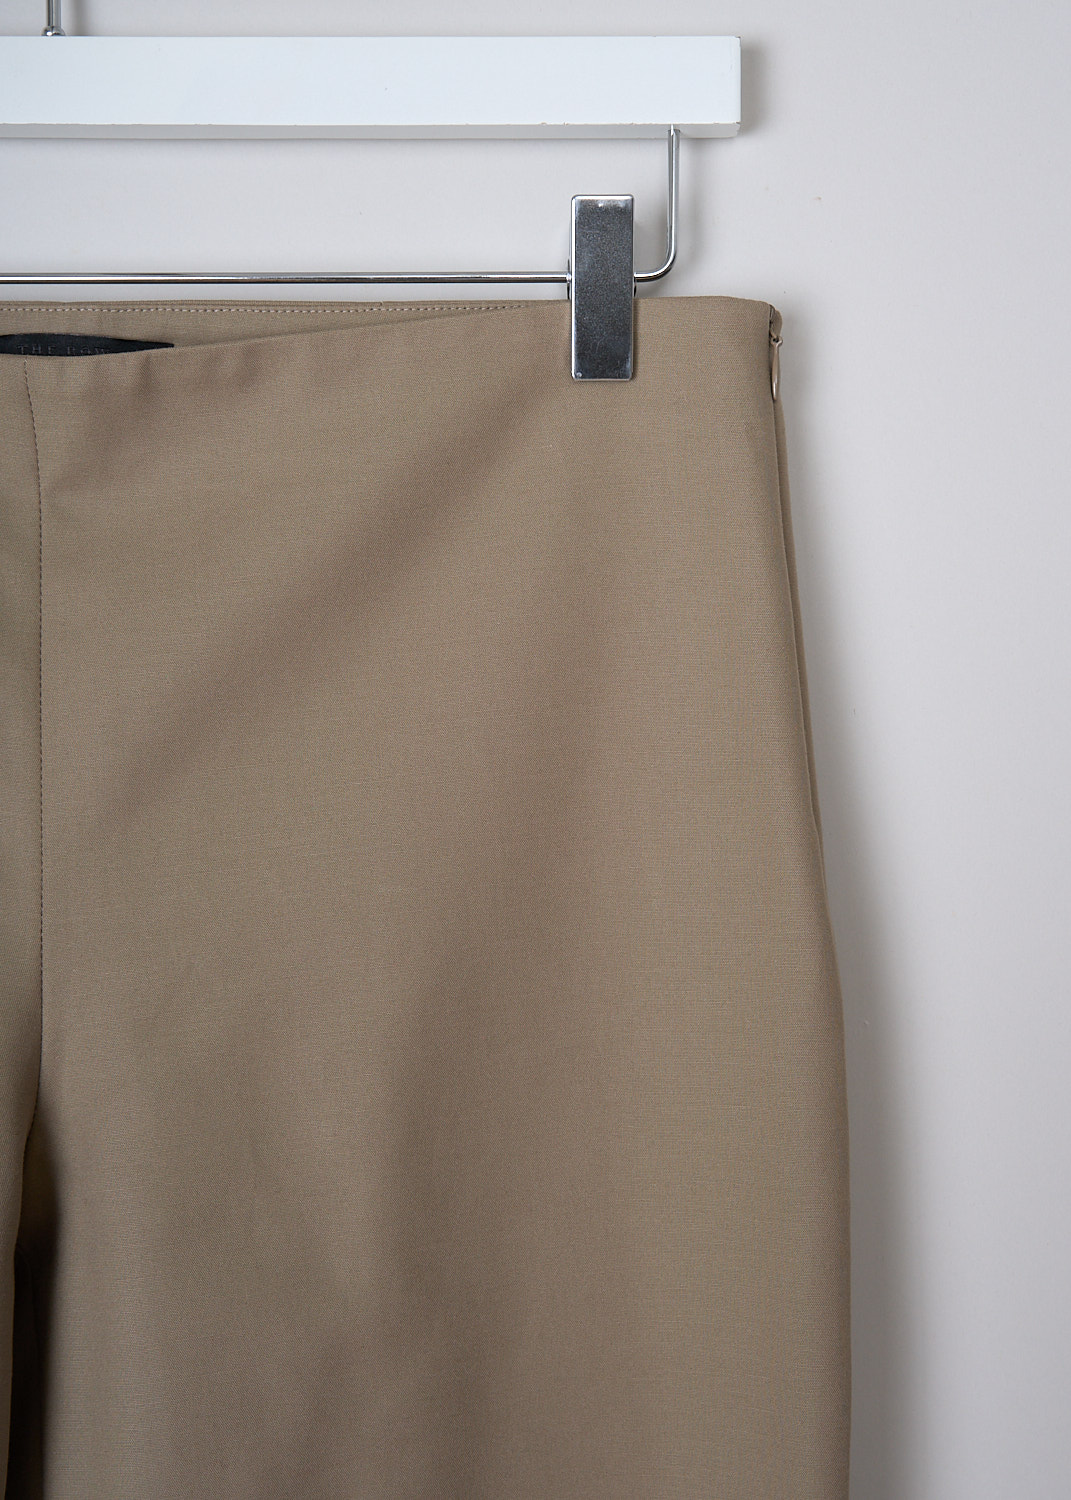 THE ROW, SOROC PANTS IN SEPIA, SOROC_PANT_396W580_SEPIA, Beige, Detail, These straight fitted Soroc pants in Sepia have a high waist and ankle length pant legs with centre seams in the back. A concealed zipper on one side function as the closure. 